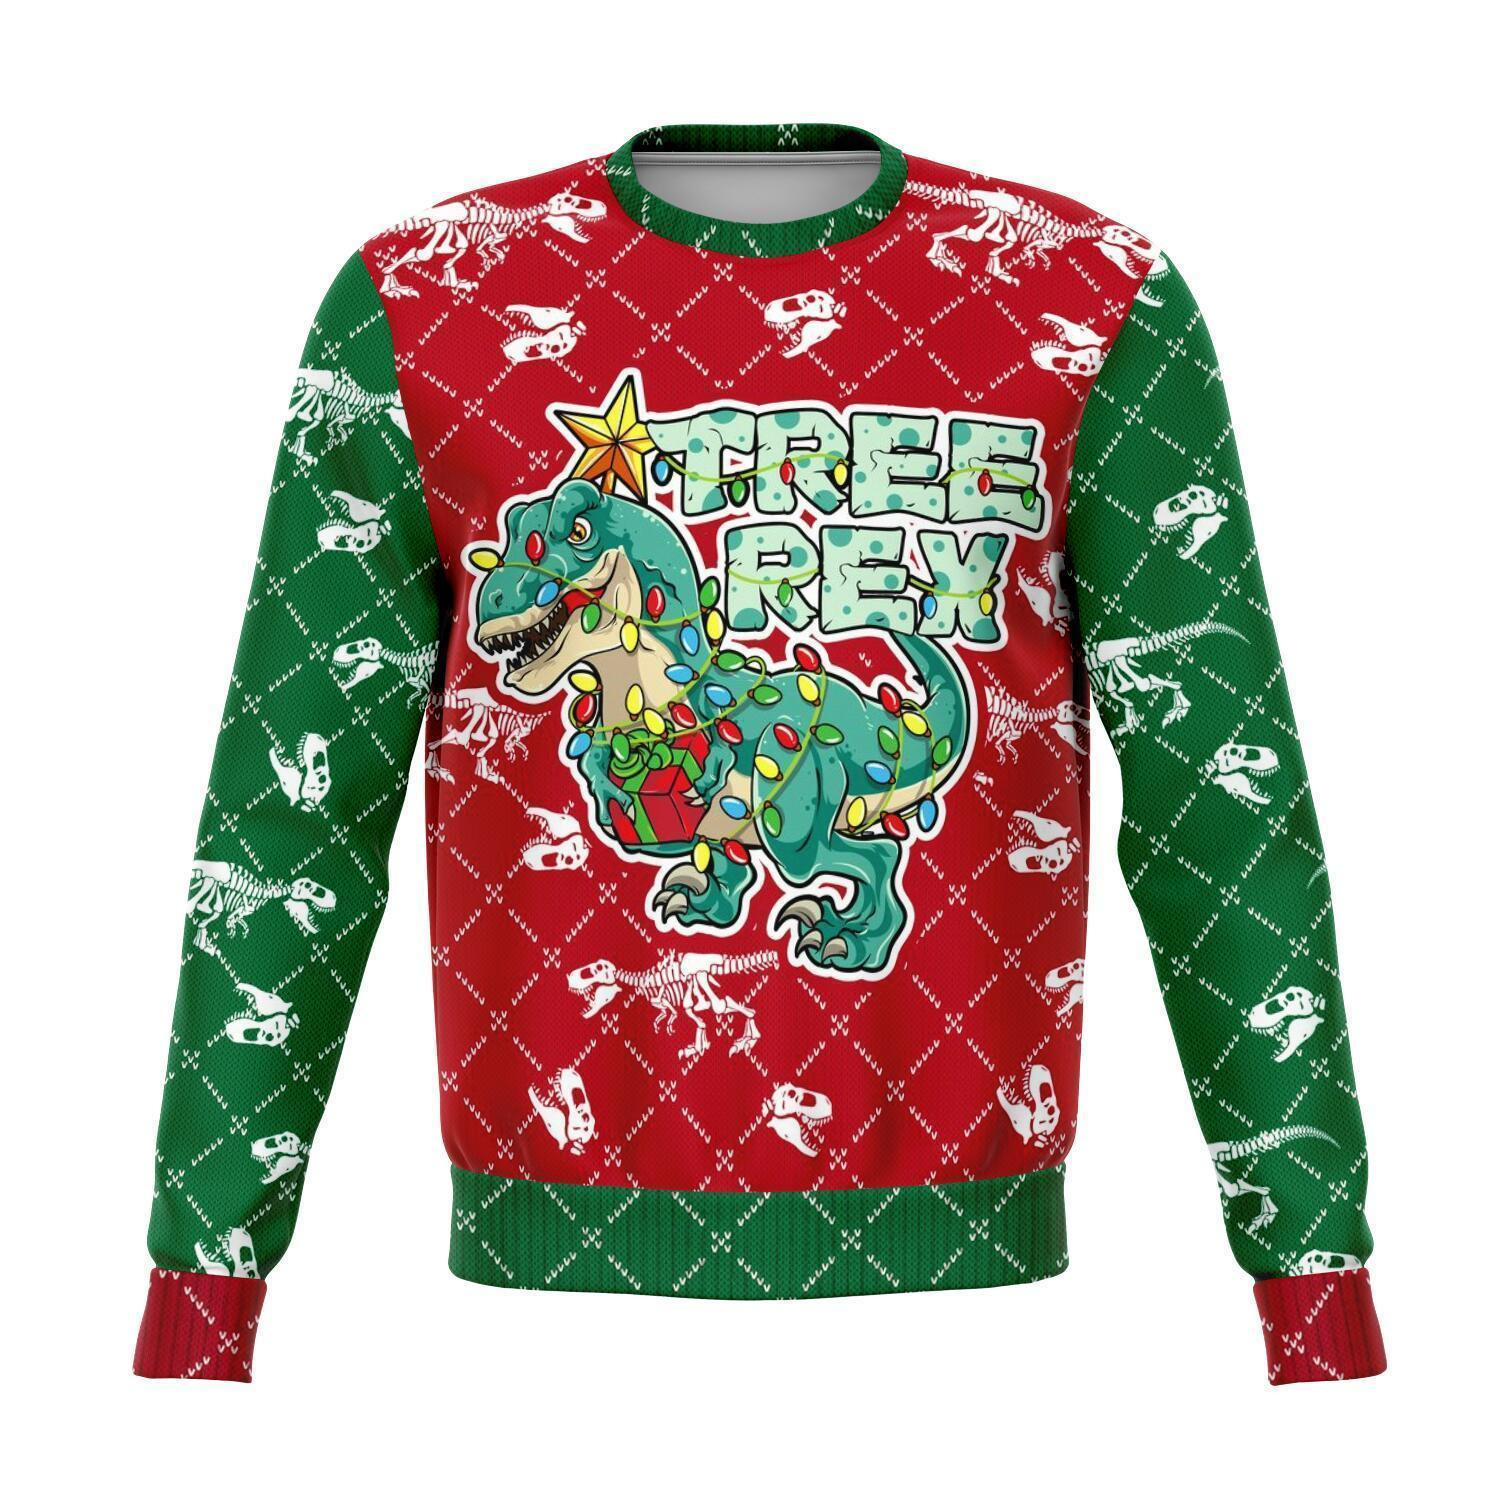 Dinosaur T-rex Ugly Christmas Sweater Ugly Sweater For Men Women, Holiday Sweater